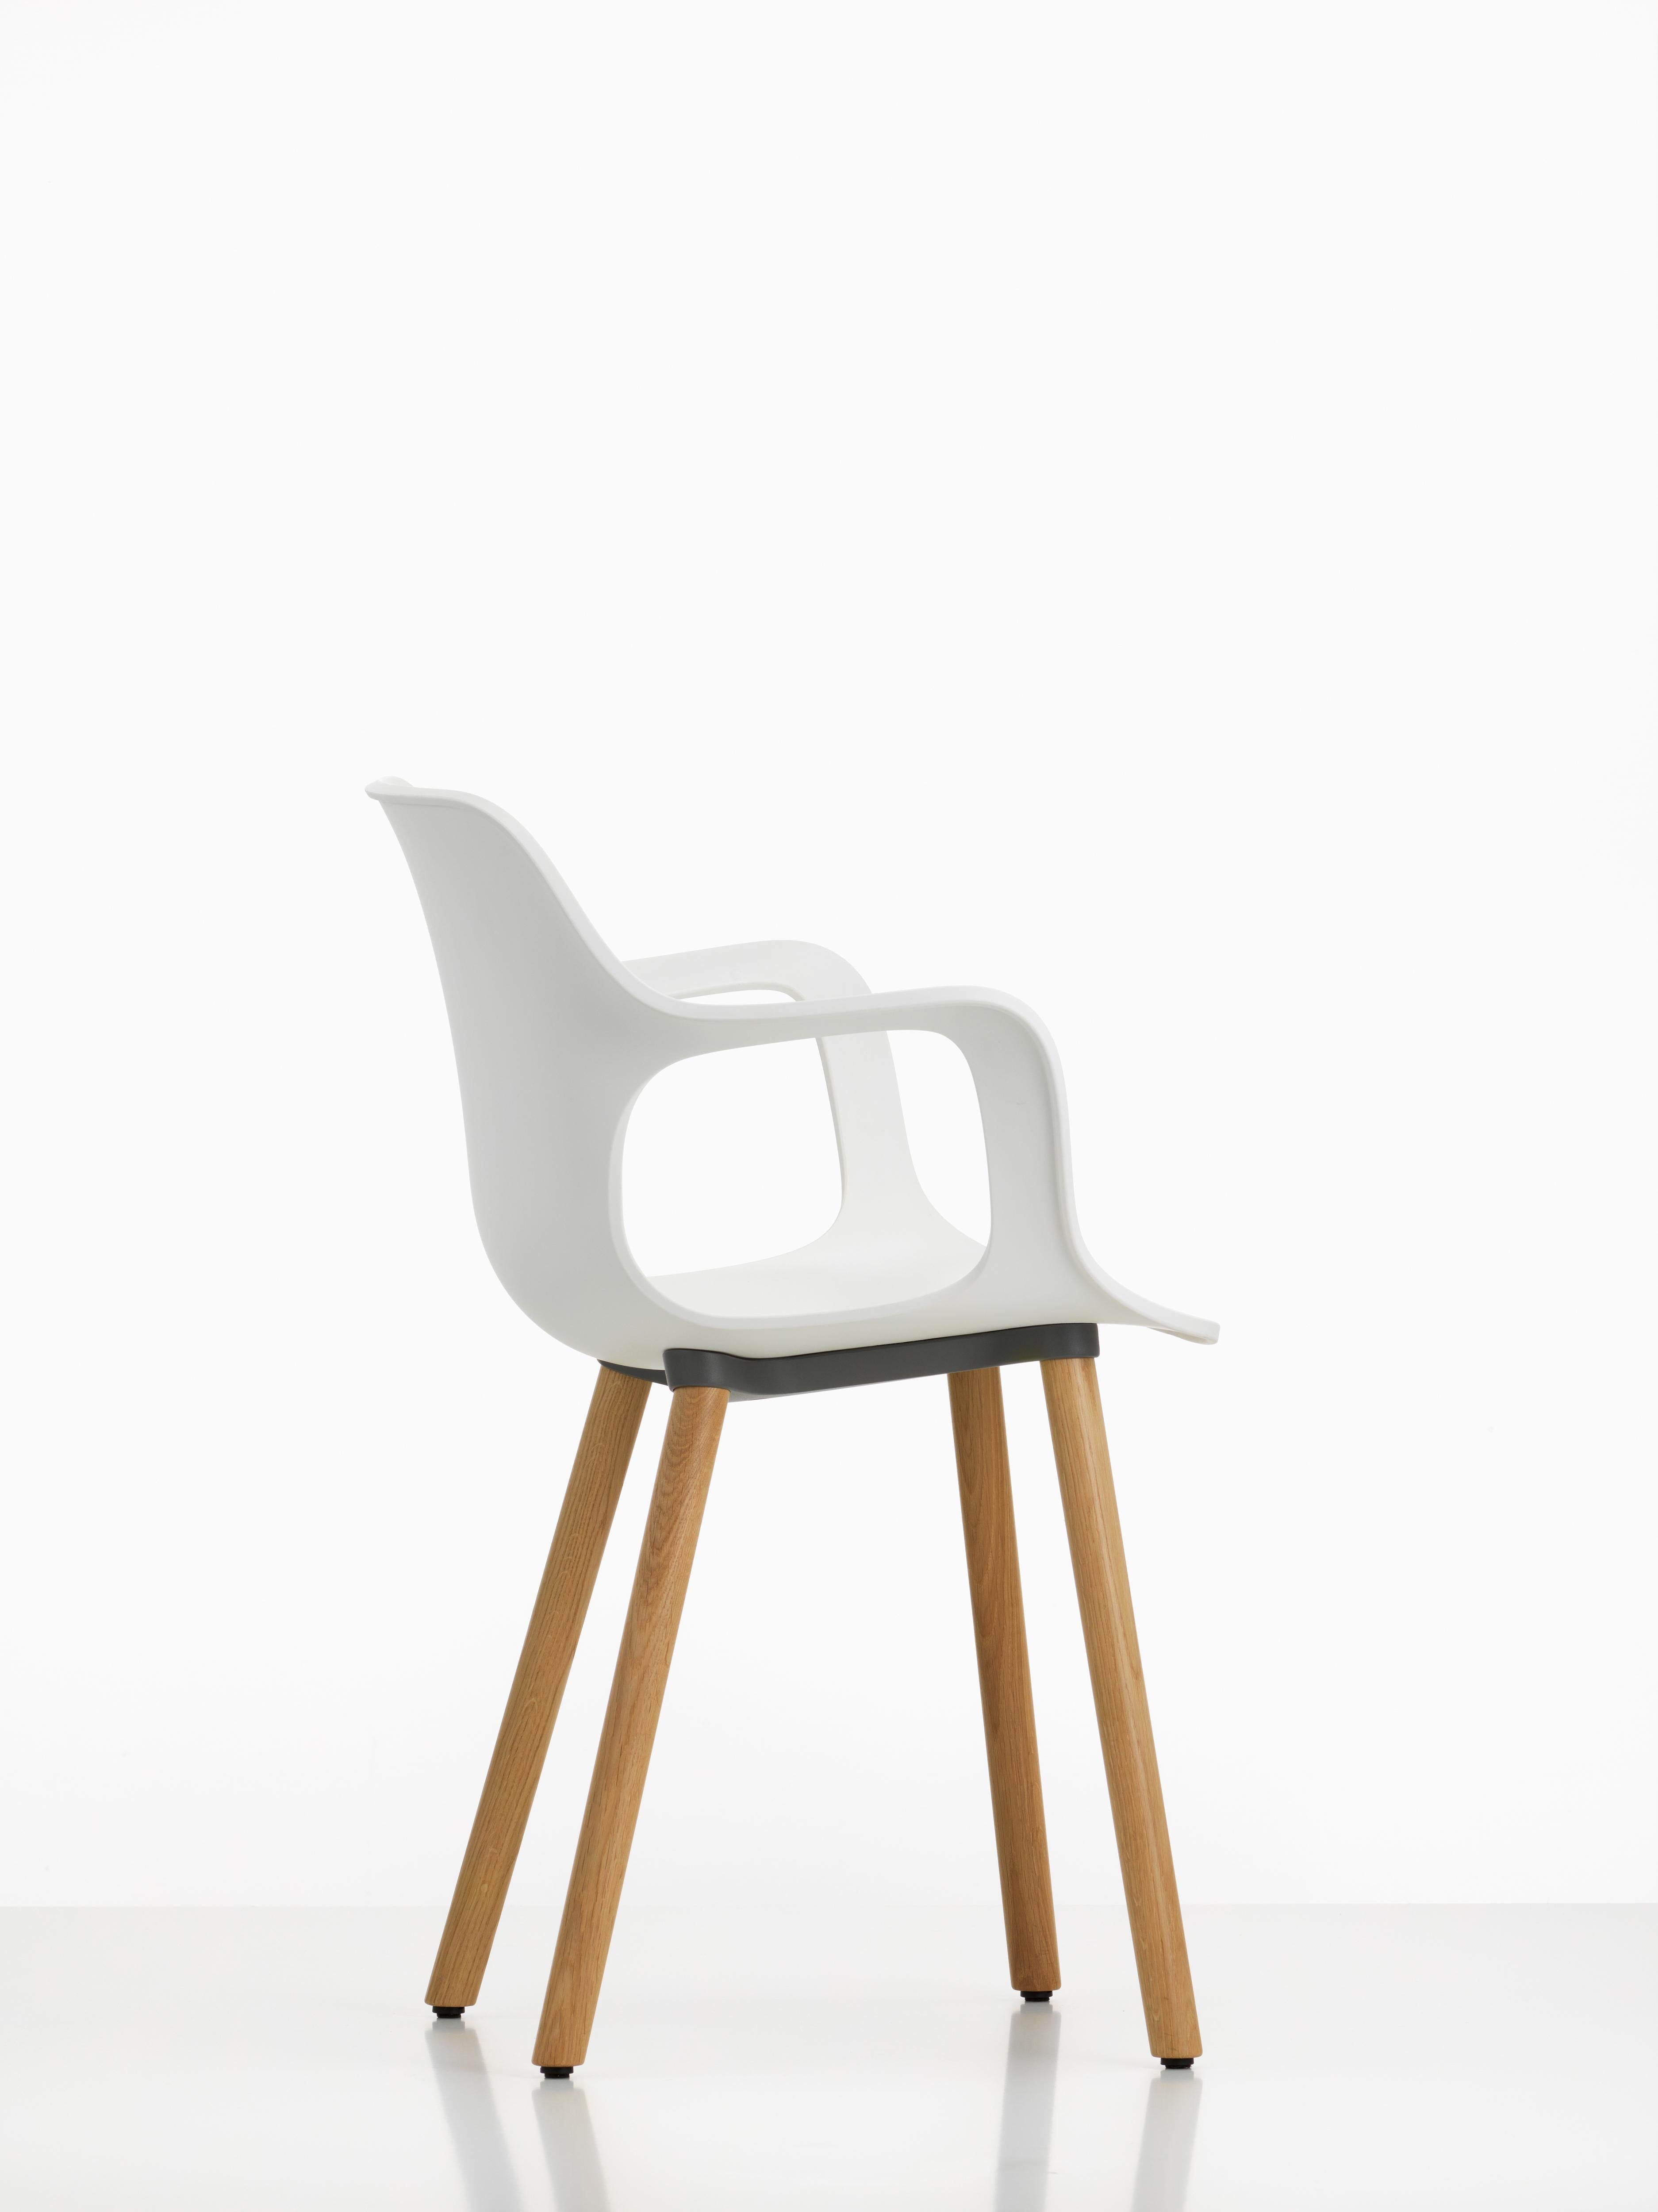 These products are only available in the United States.

HAL Armchair Wood by Jasper Morrison has a distinctive design, which combines a curved plastic shell with the contrasting linearity of a robust four-legged wooden base. The comfortable seat